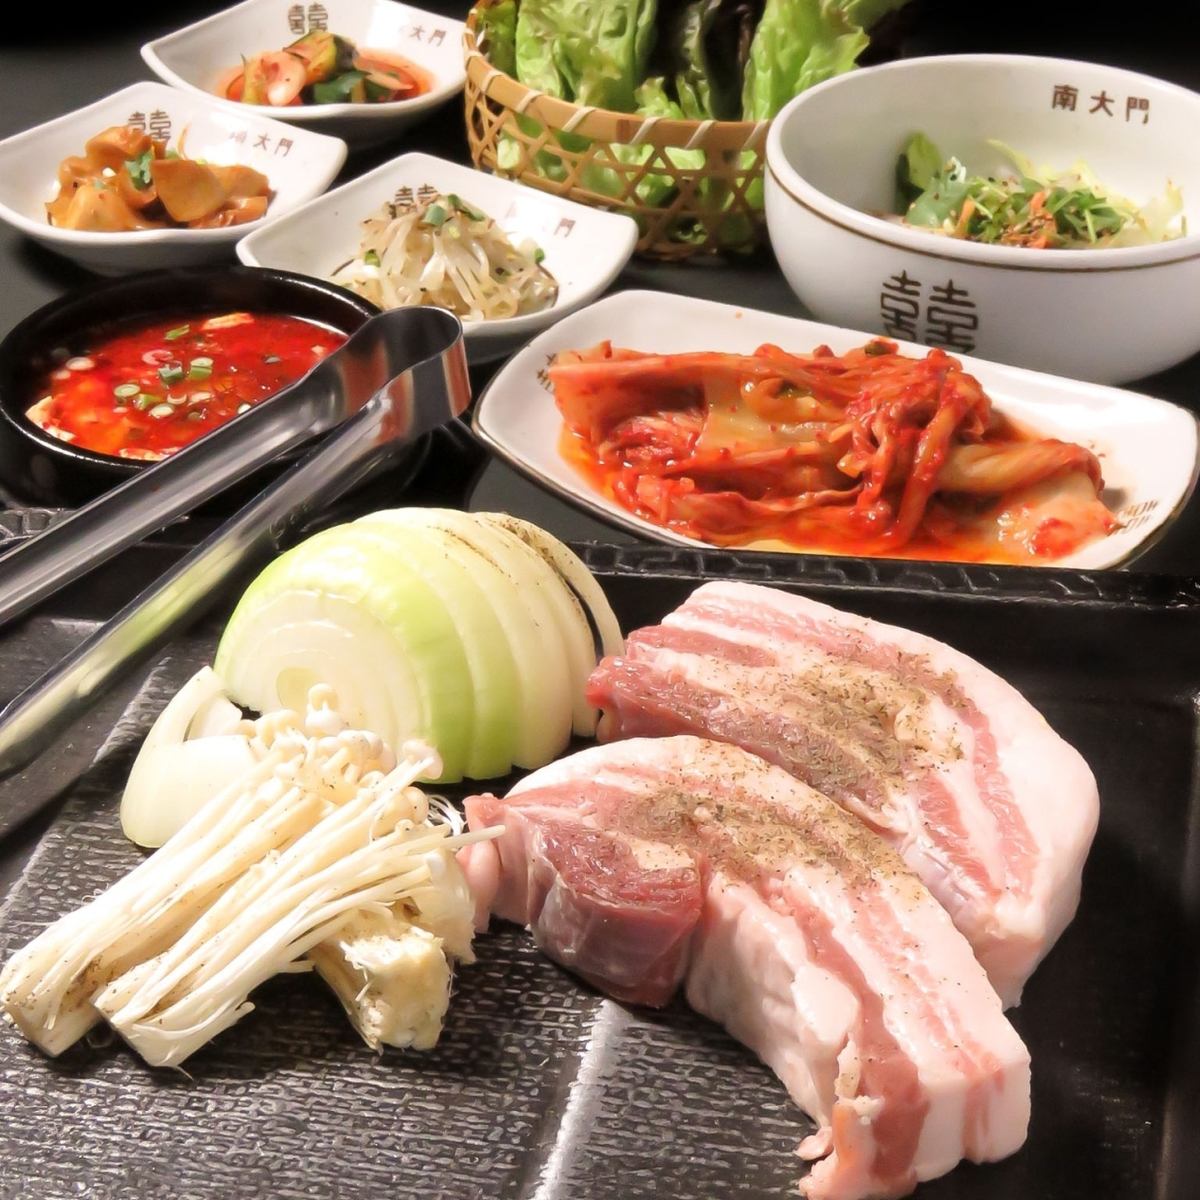 Full of flavor! Healthy and hearty samgyeopsal!